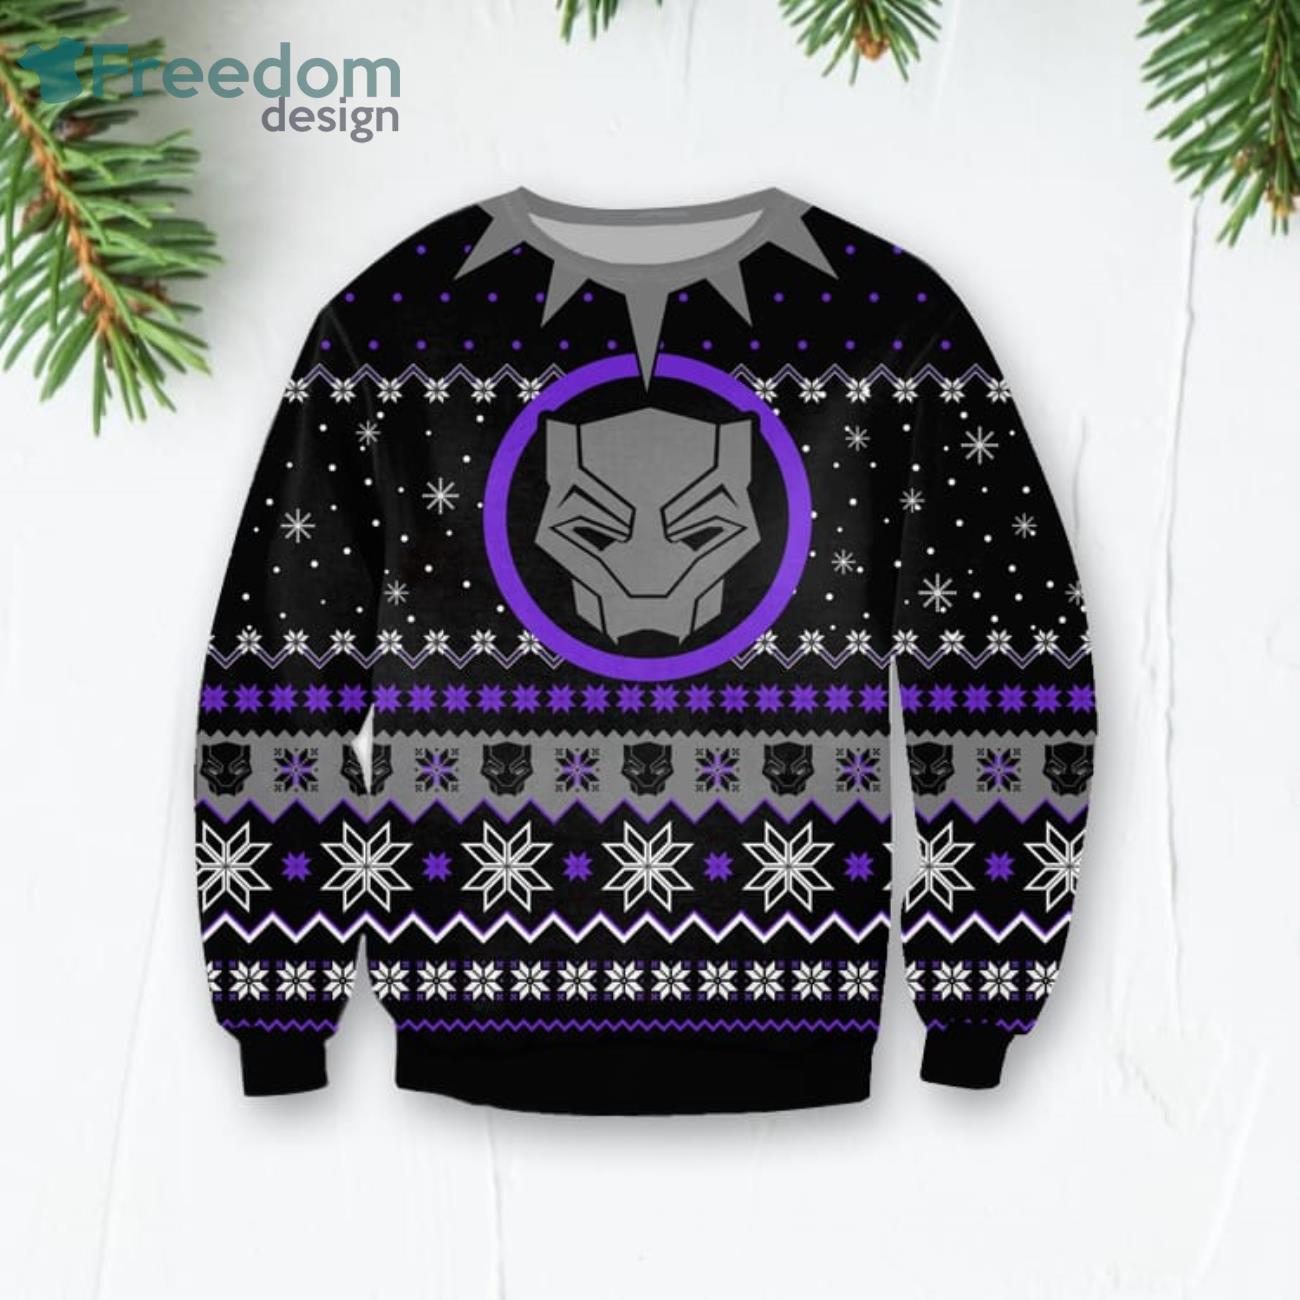 Black Panther Red Christmas Ugly Sweater